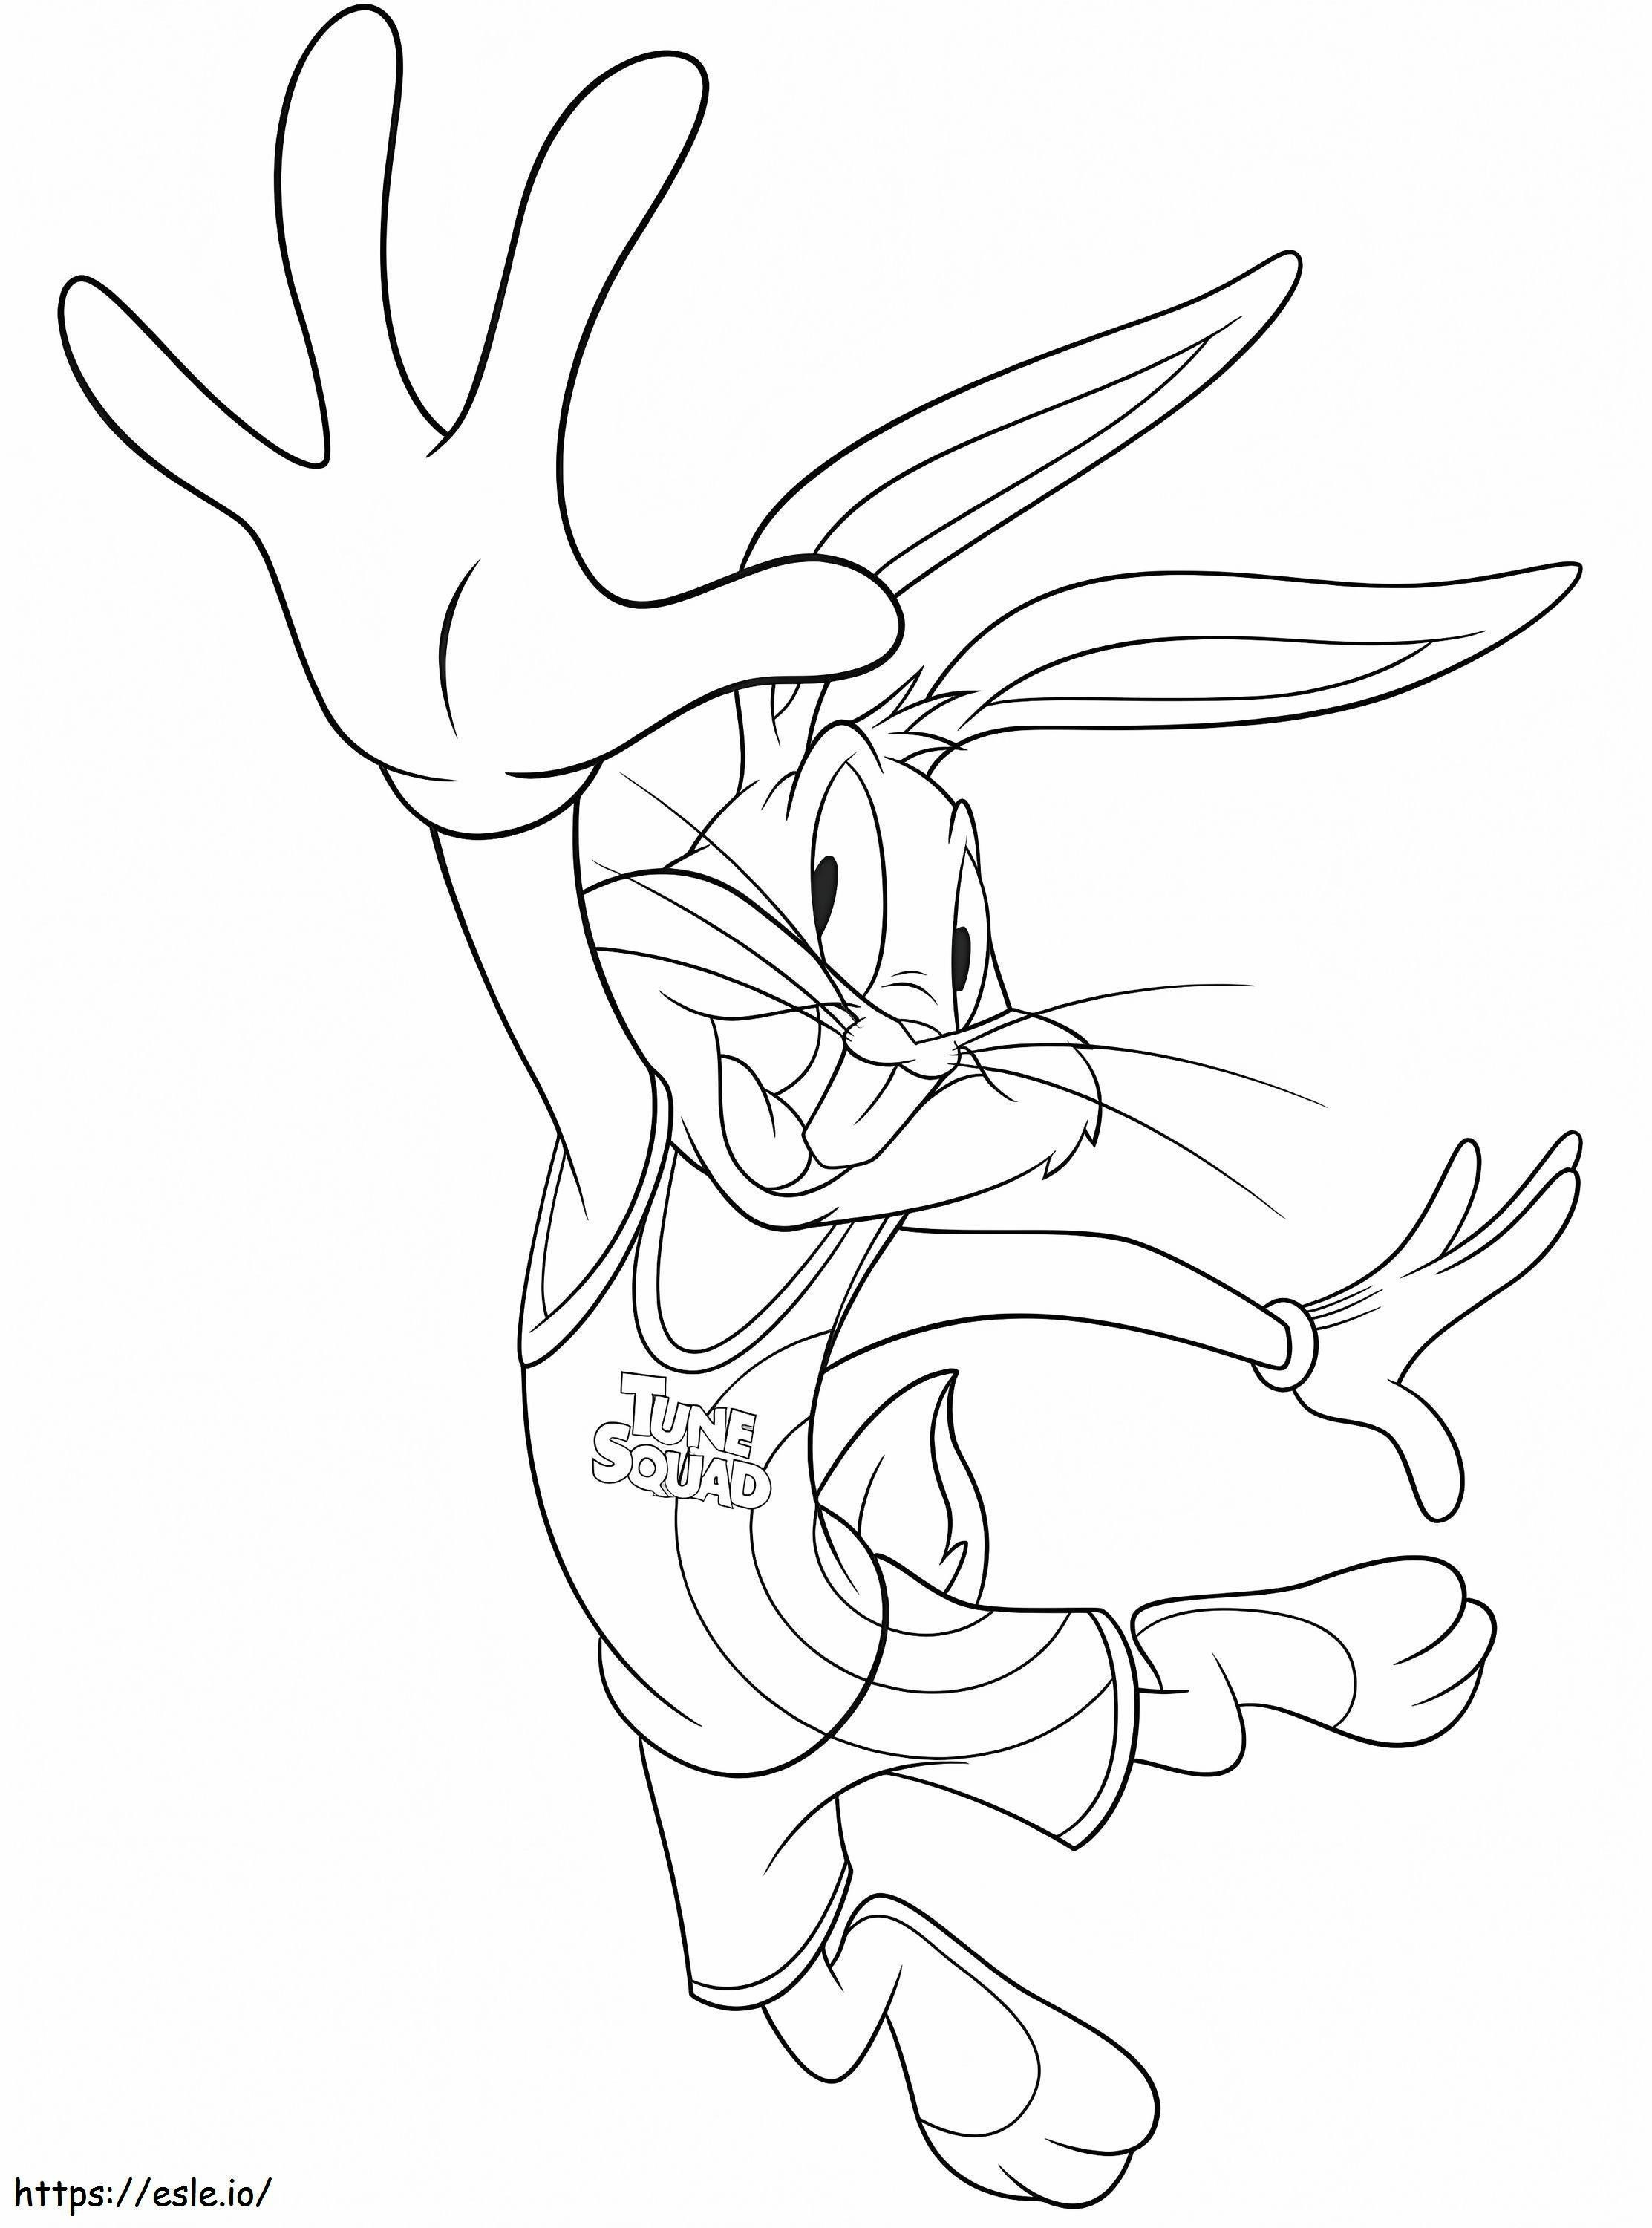 Space Jam Bugs Bunny coloring page